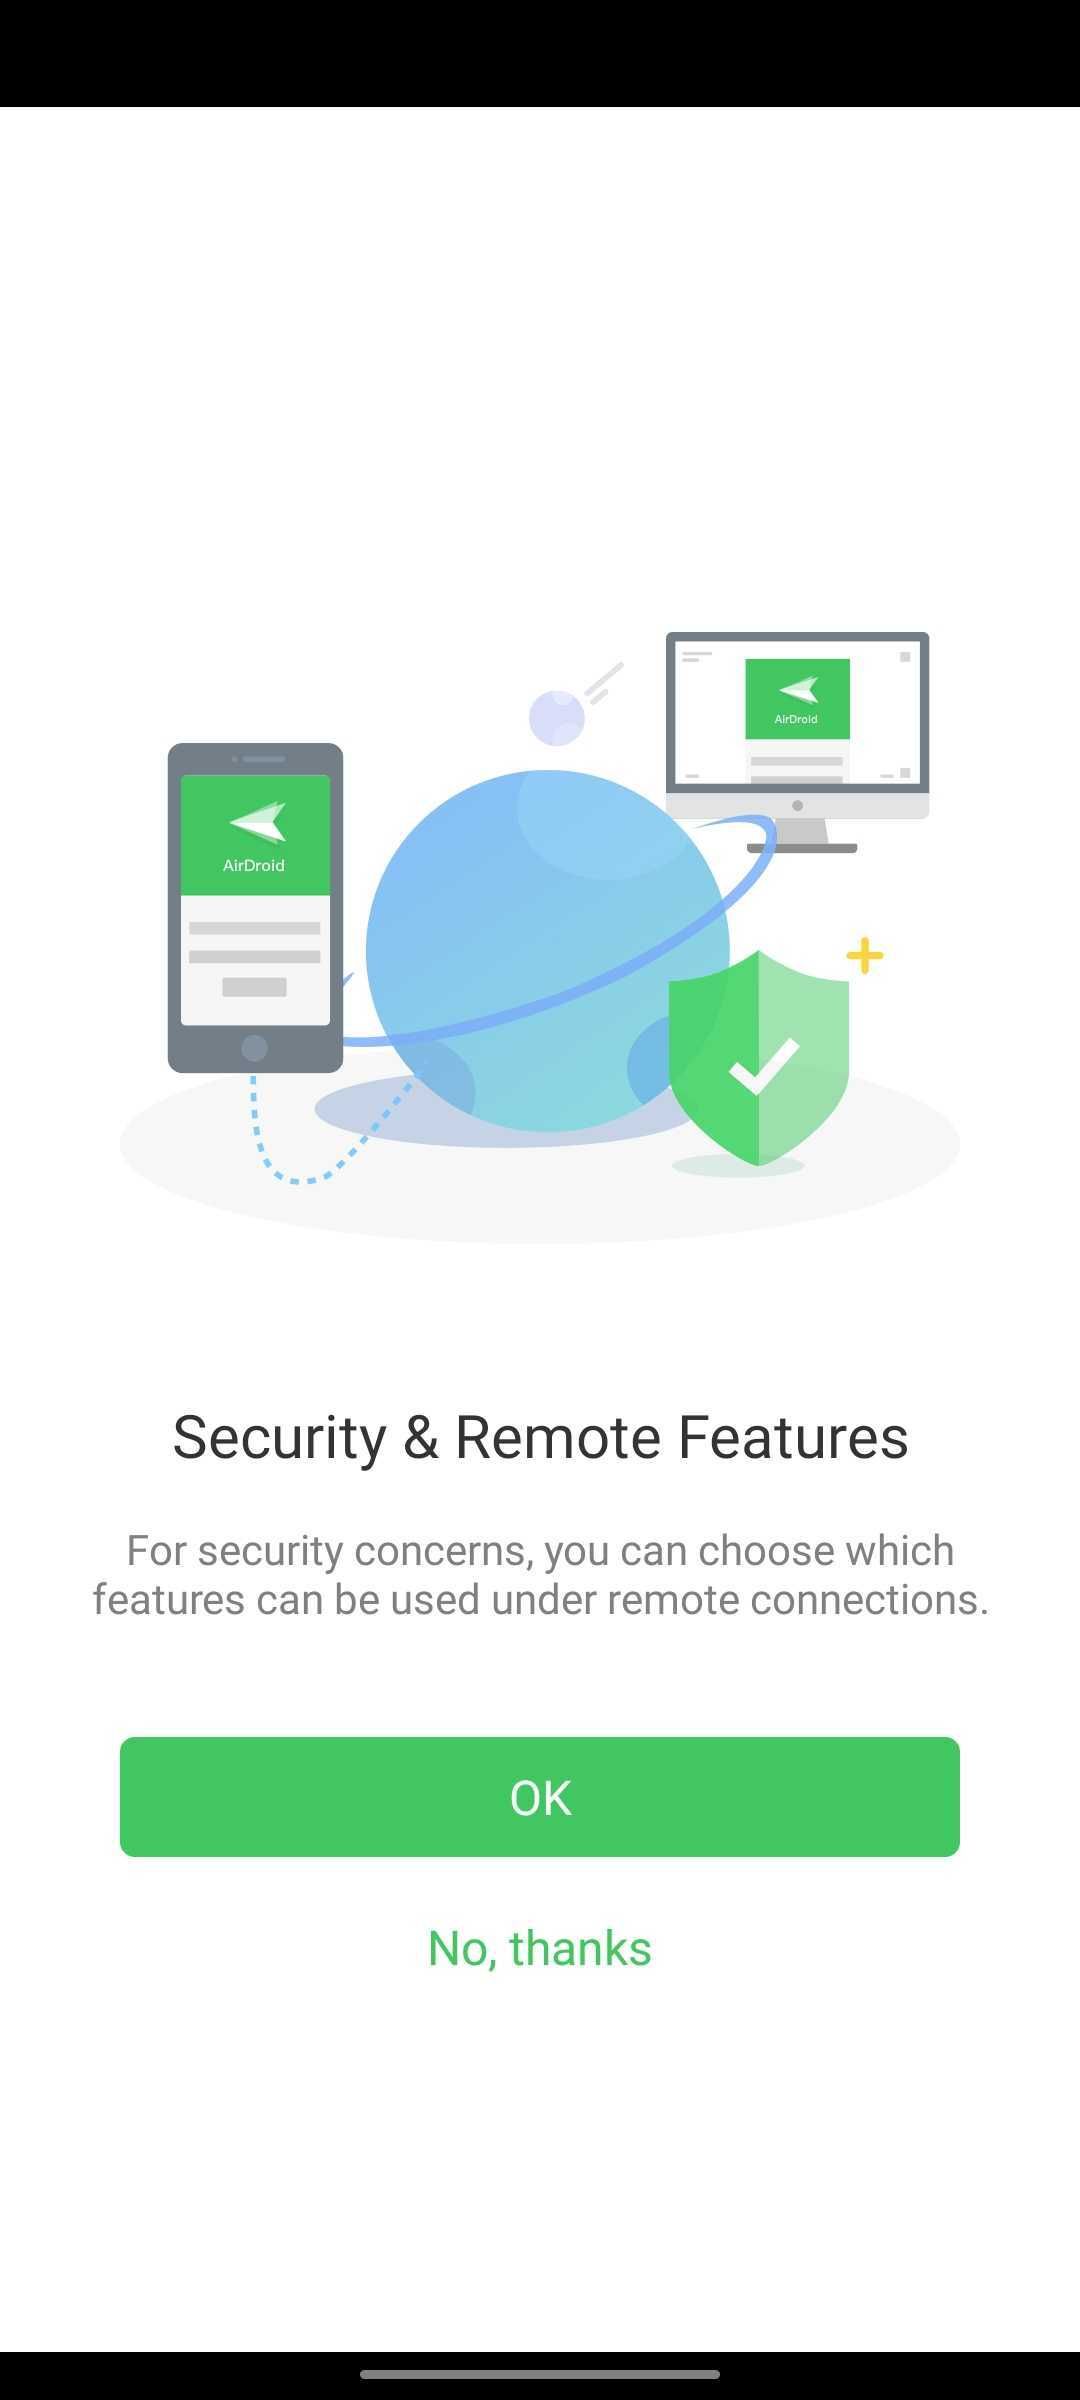 Access the security and remote features